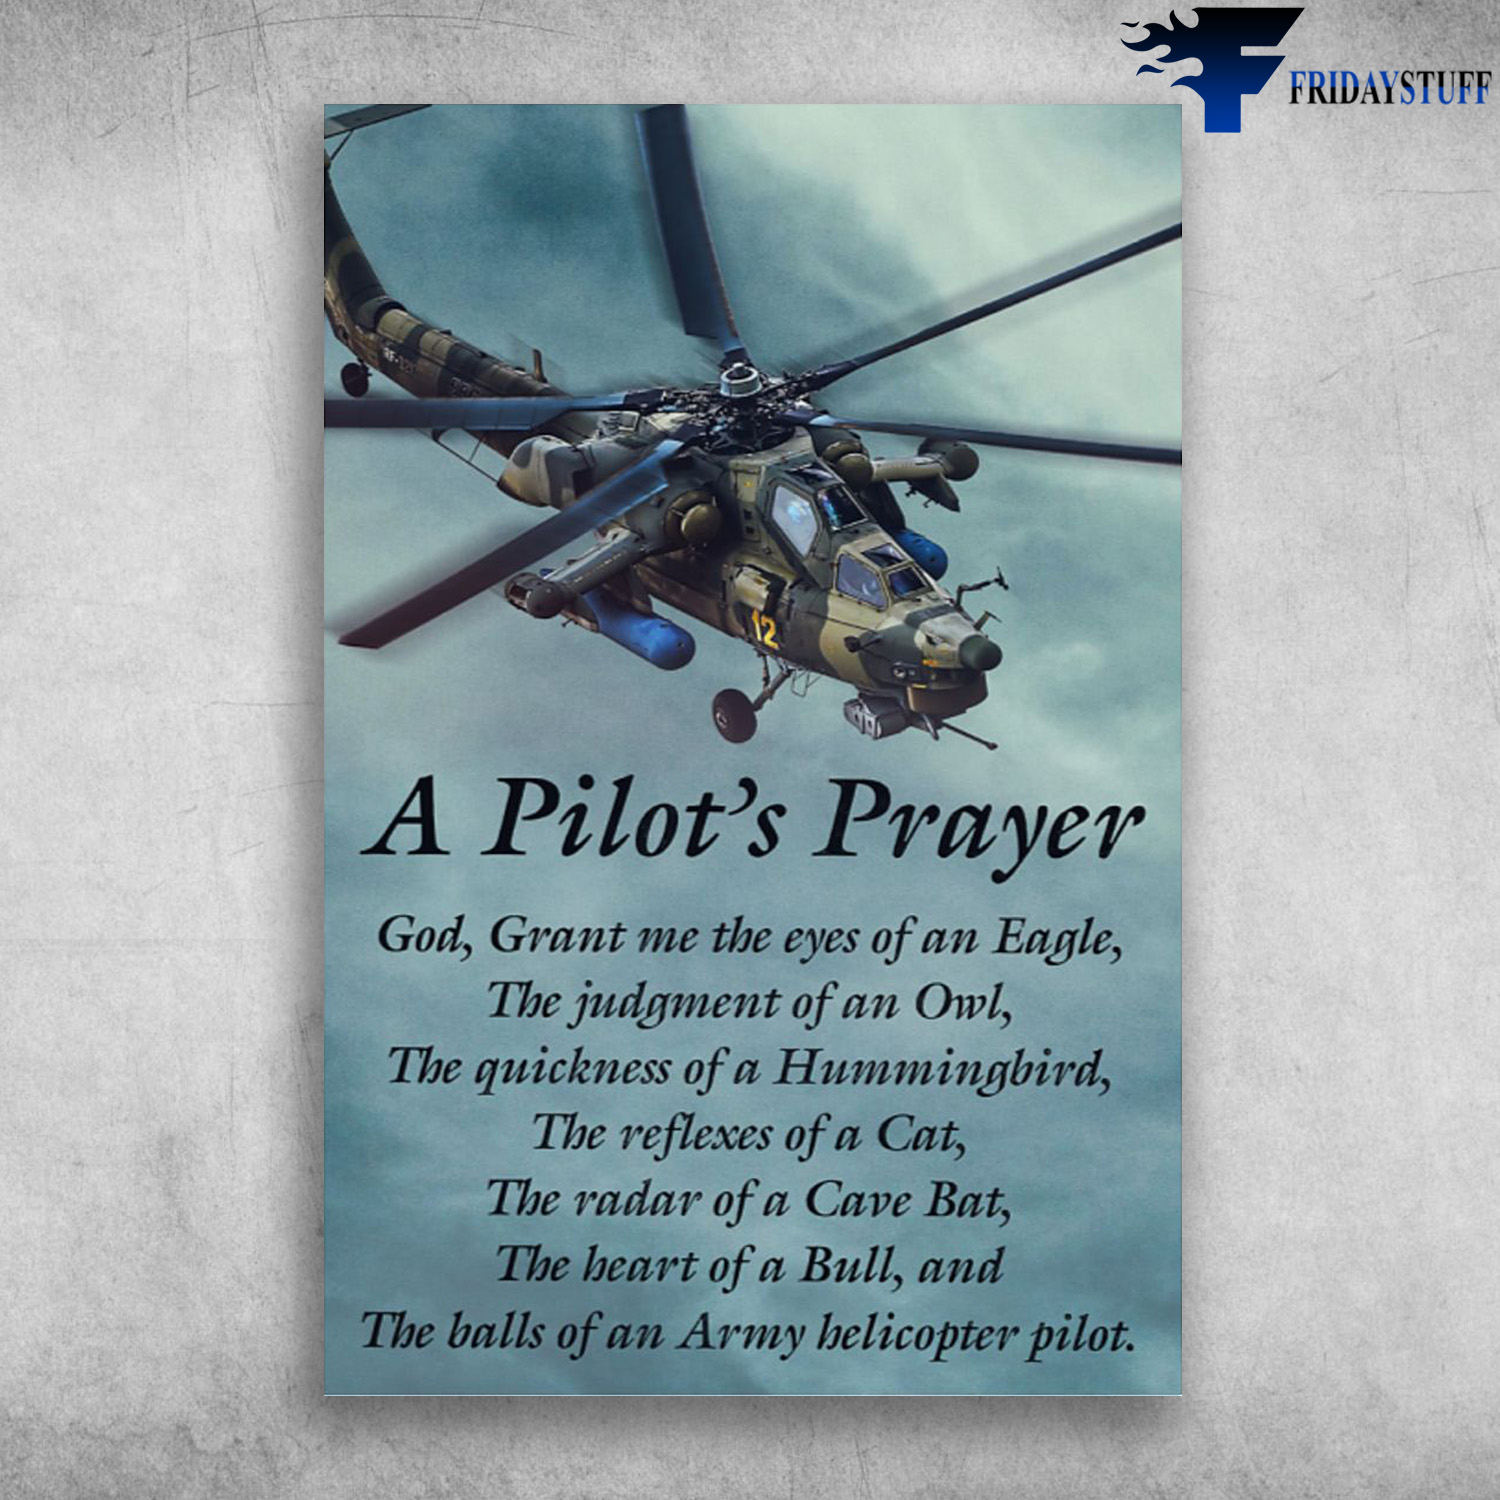 A Pilot's Prayer - God, Grant Me The Eyes Of An Eagle, The Judgment Of An Owl, The Quickness Of A Hummingbird, The Reflexes Of A Cat, The Heart Of A Bull, And The Balls Of An Army Helicopter Pilot